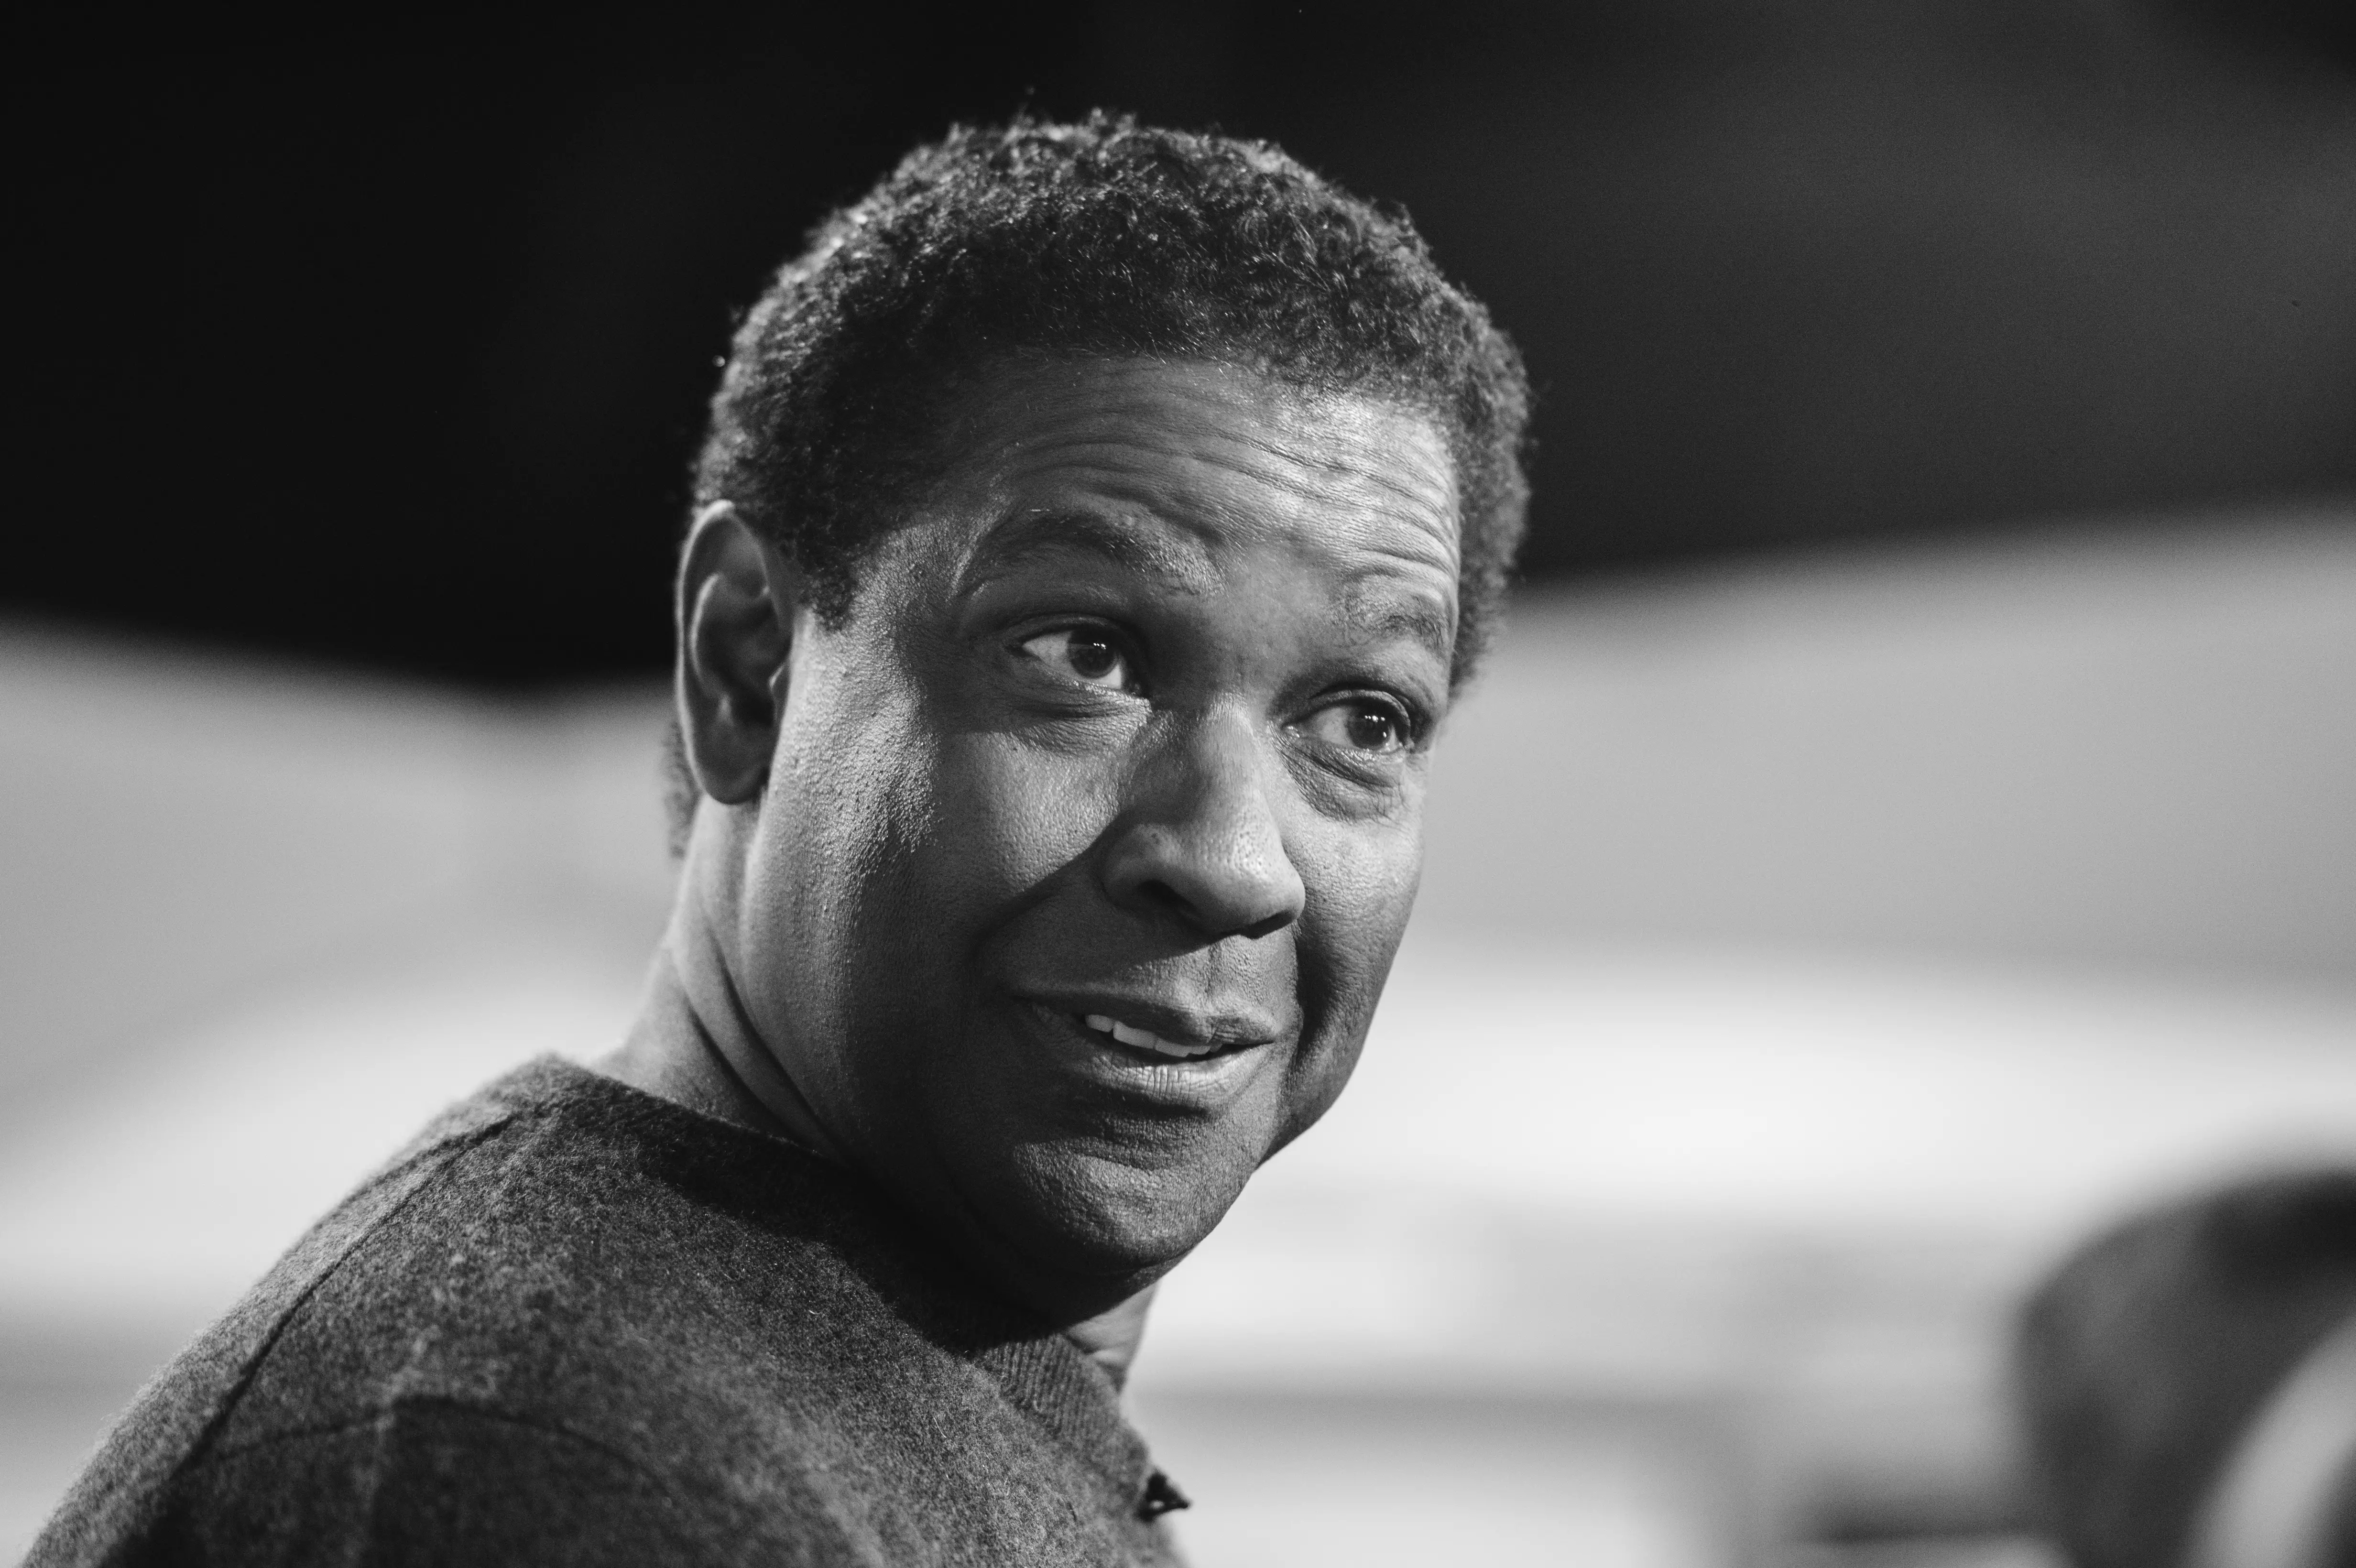 23 Most Interesting Facts About Denzel Washington You Should Know